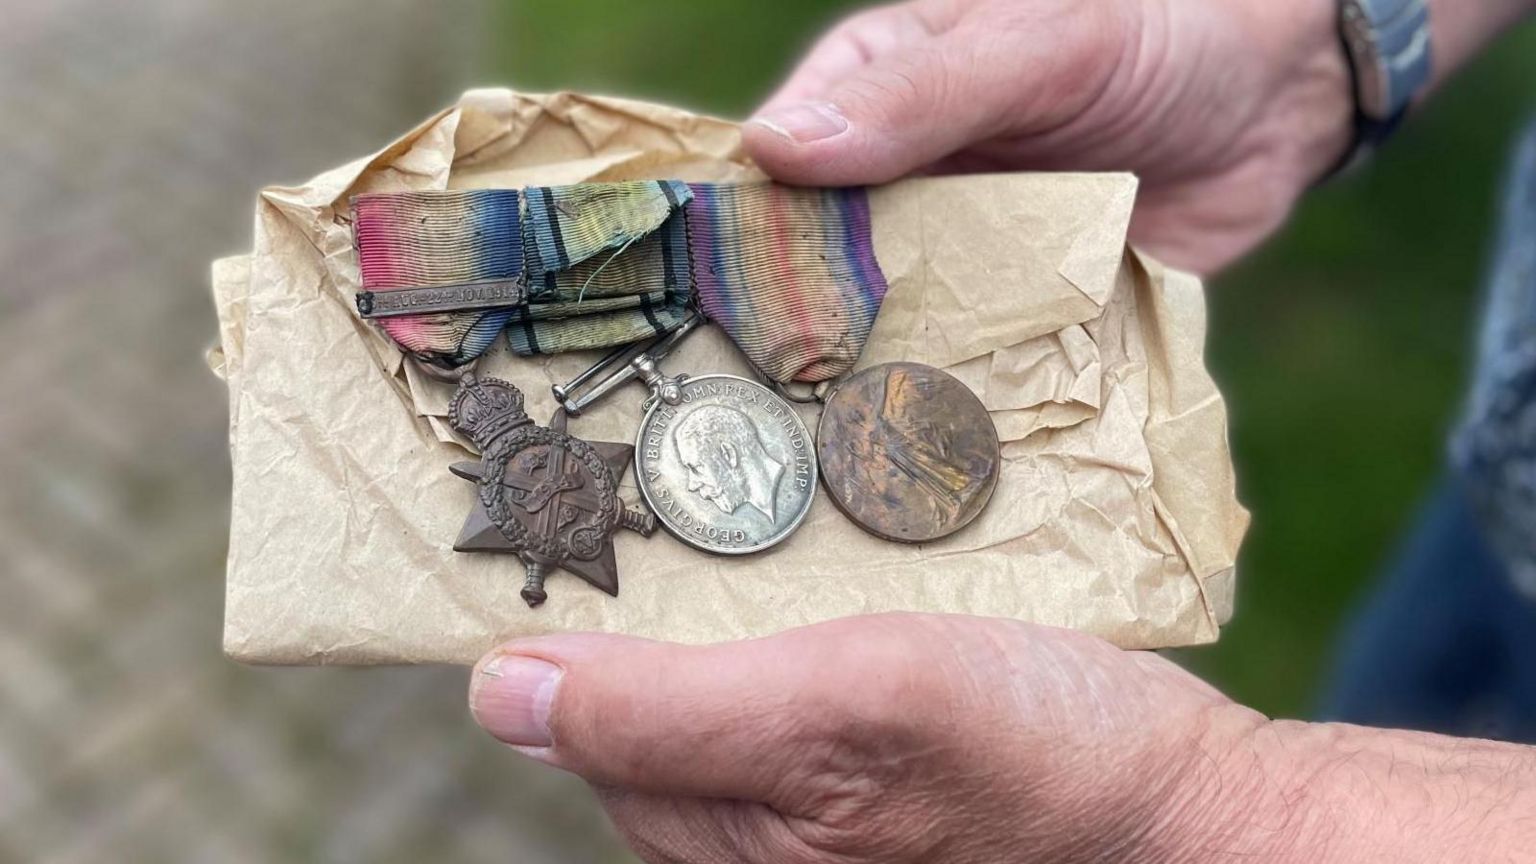 Three old medals in tissue paper are held in a man's hands.